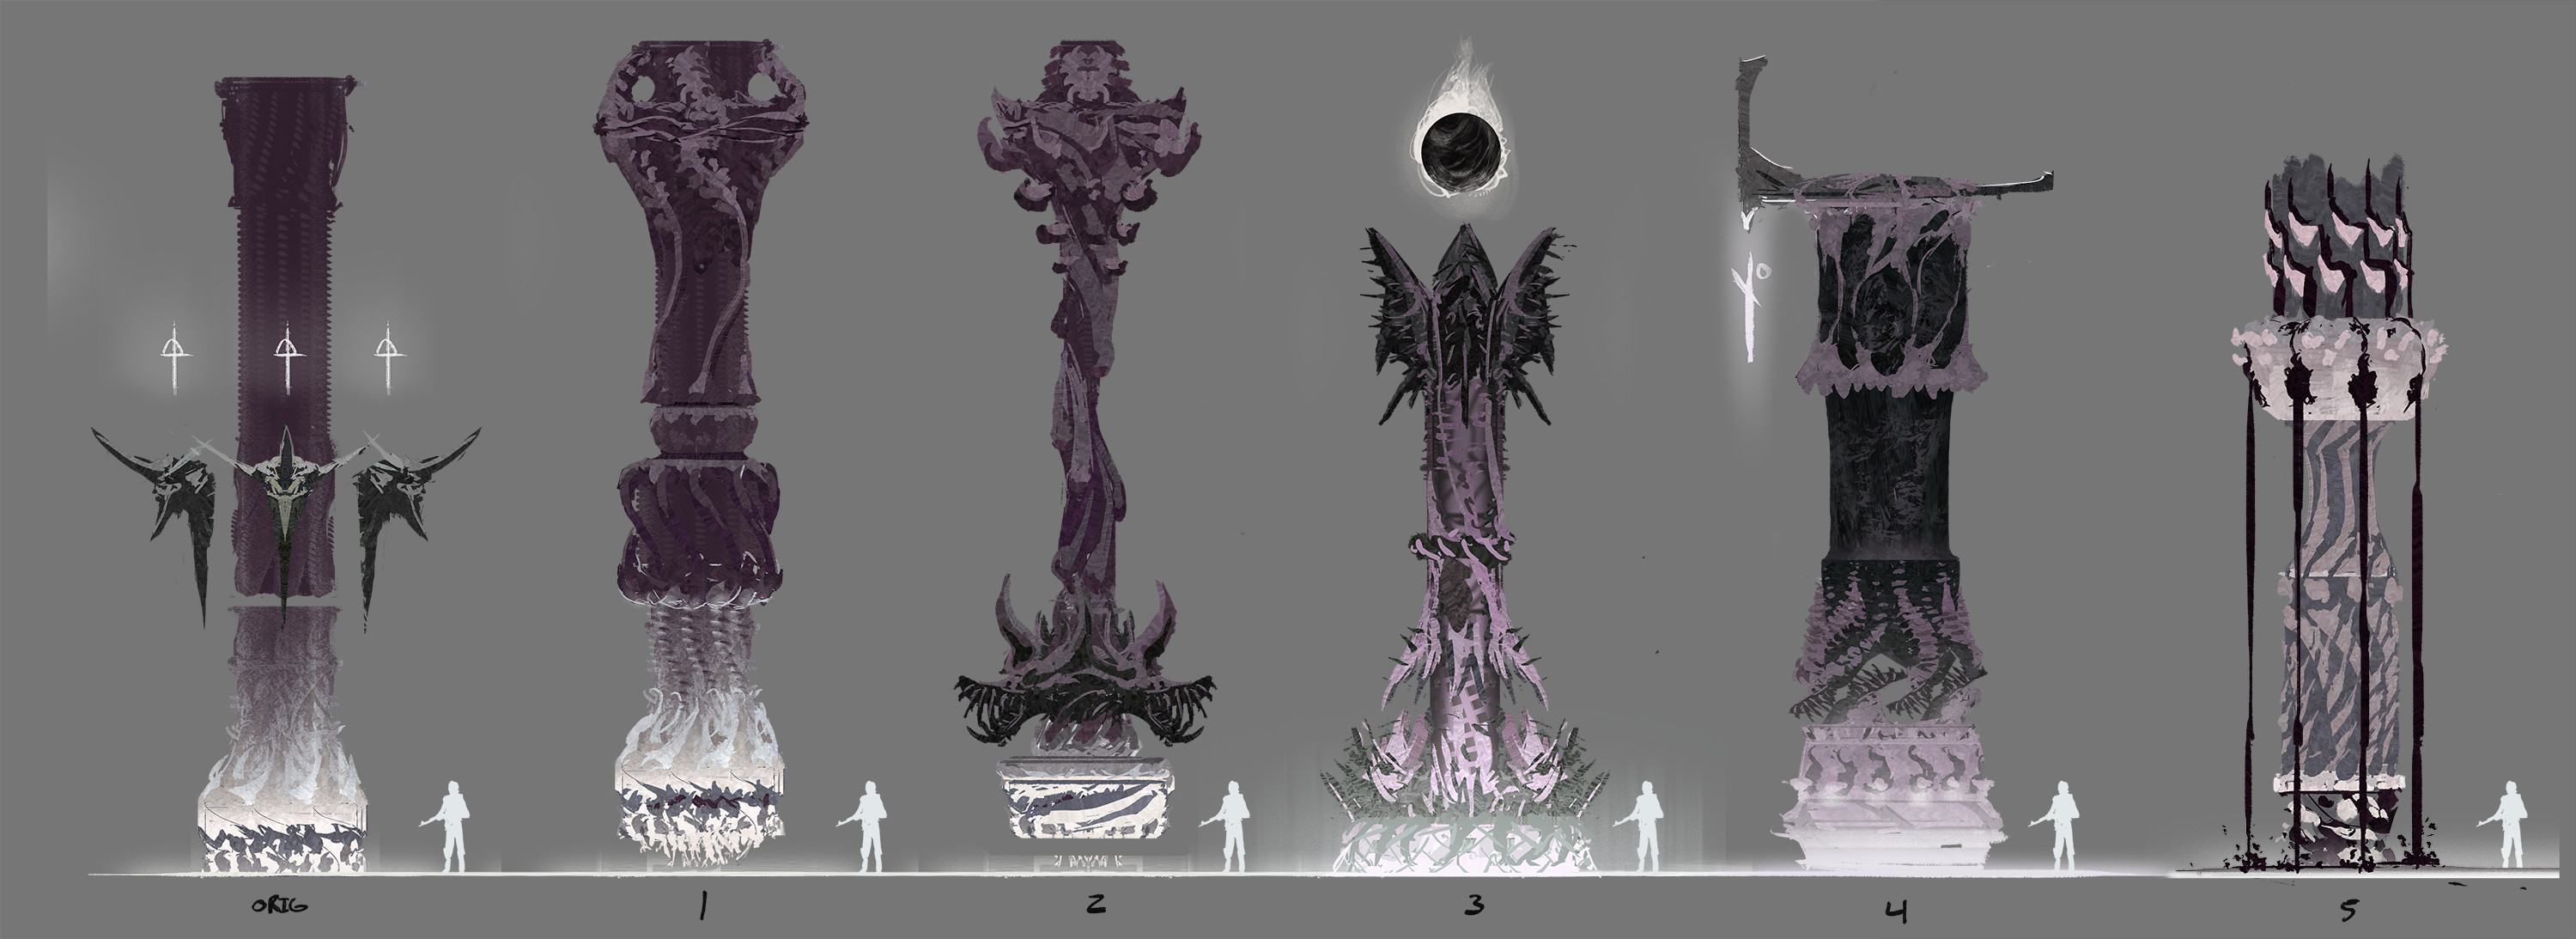 Concepts for columns in the alien cathedral.